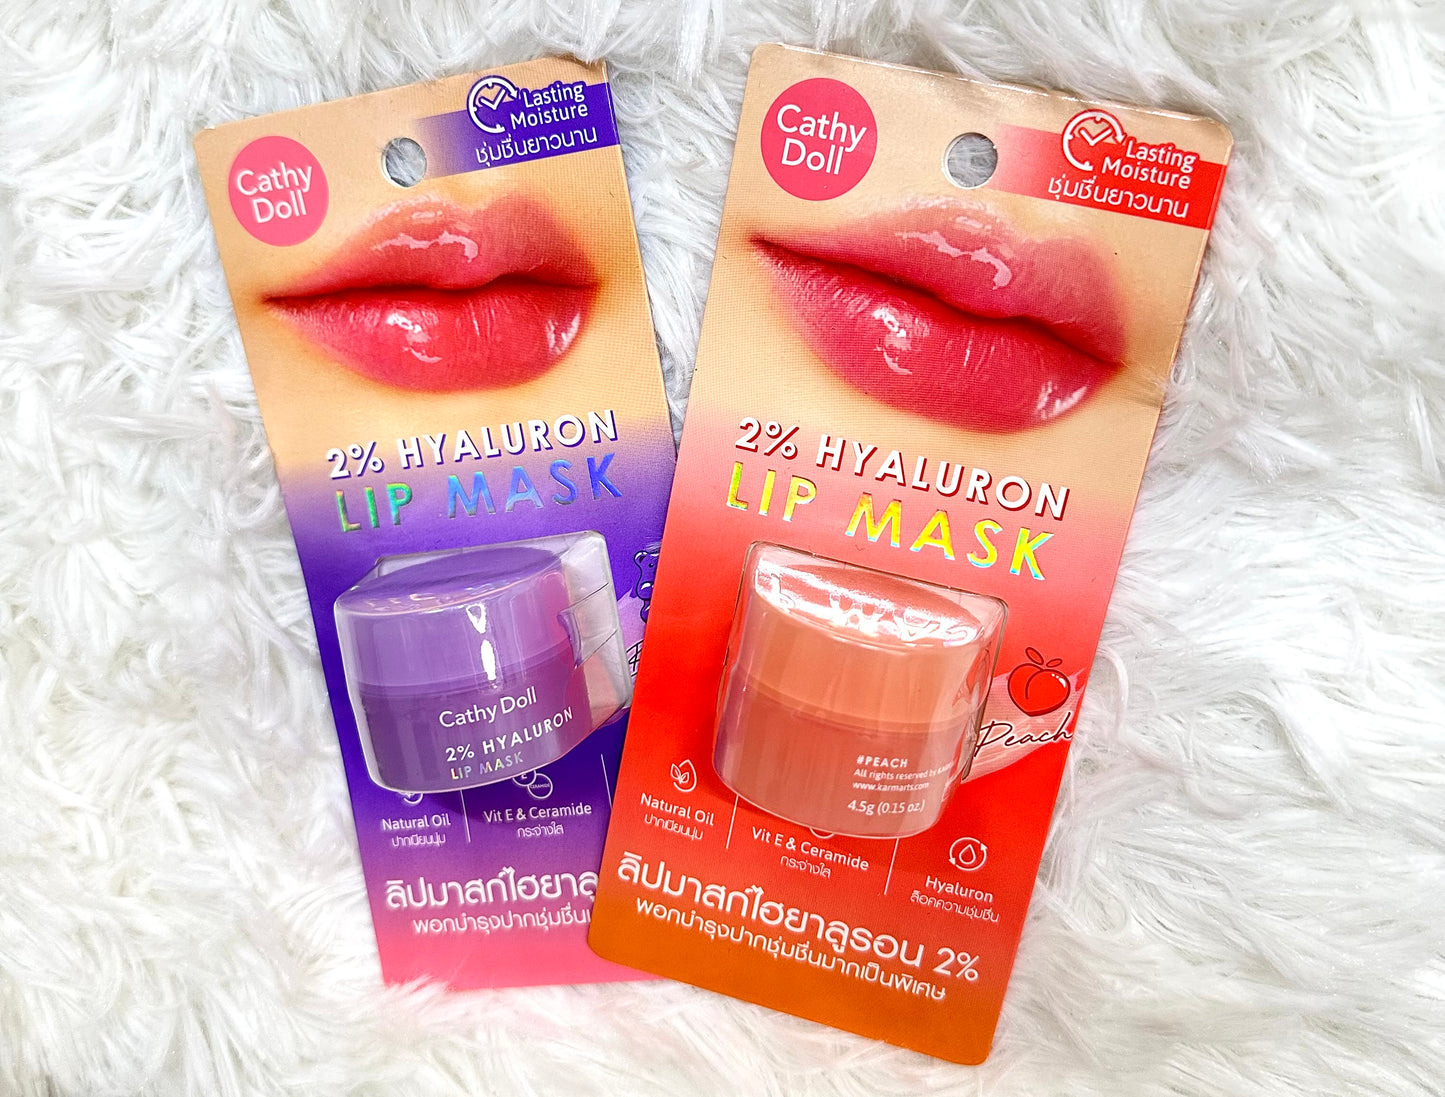 [Promotion] Cathy Doll - 2% Hyaluron Lip Mask